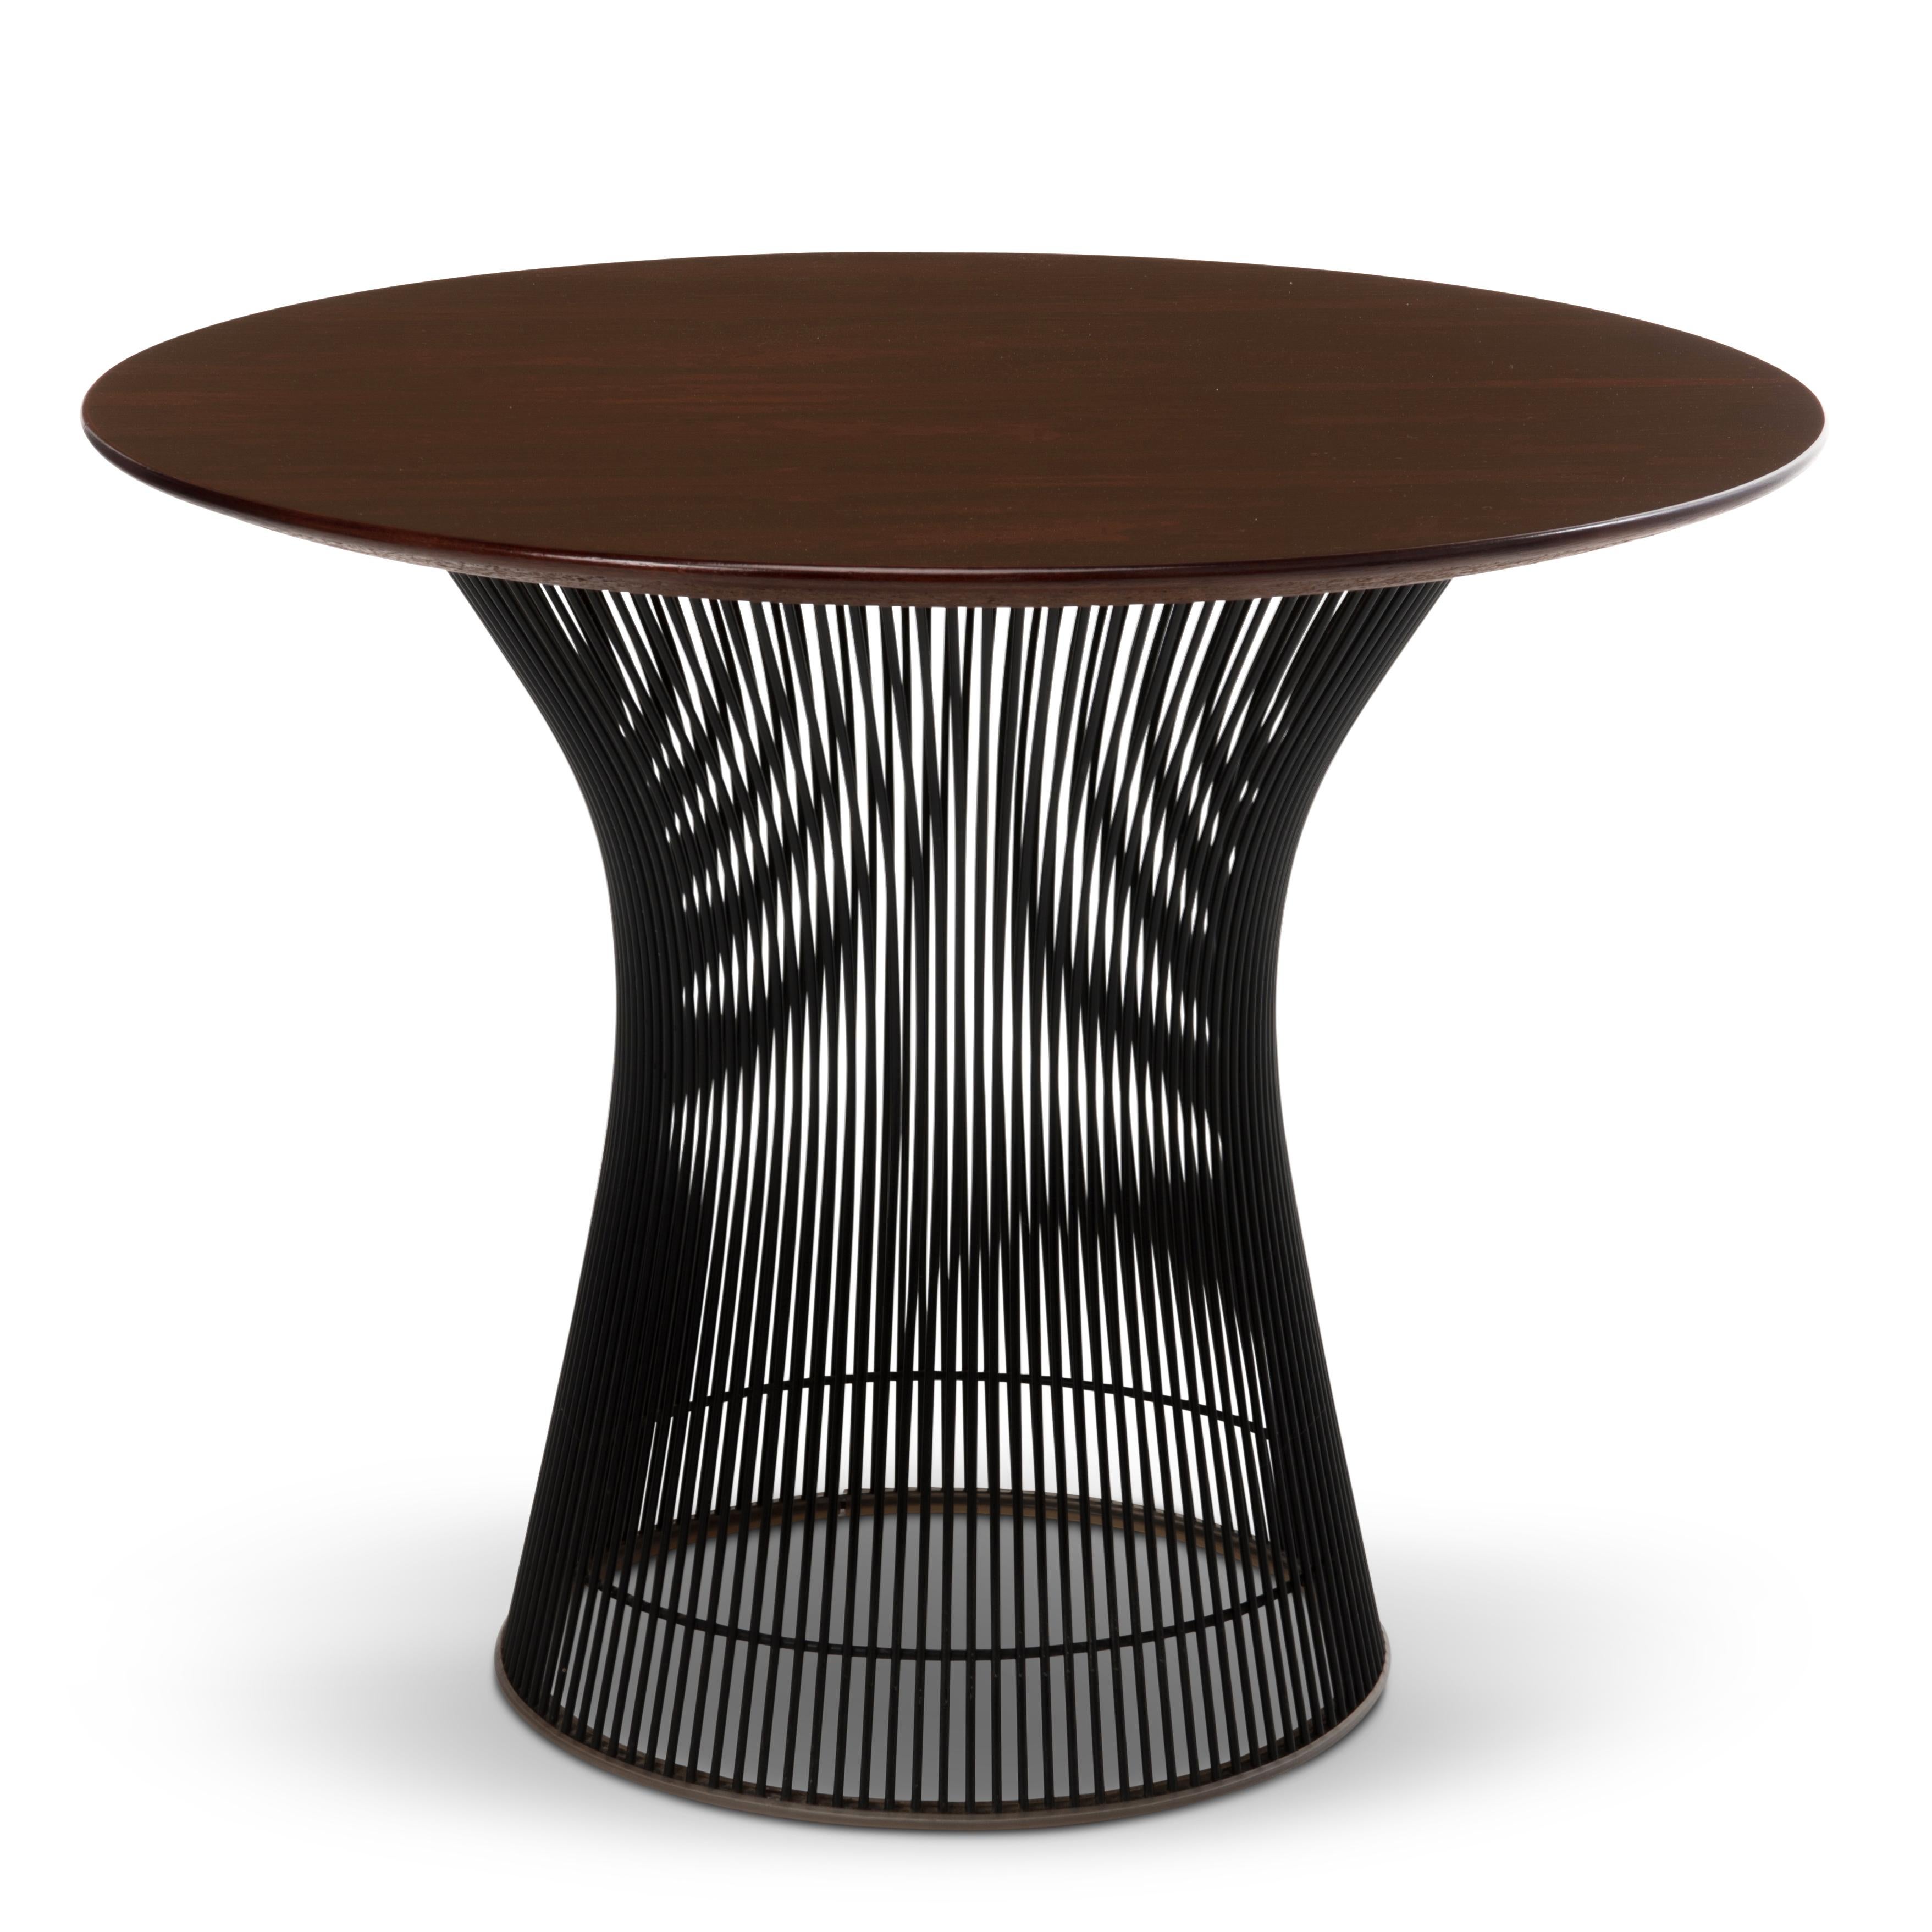 Wonderful 1970s rosewood and black base side table designed by Warren Platner for Knoll Associates from the estate of a Knoll employee in East Greenville, PA. 

The last photograph shows this table to the left with a second, unmarked Warren